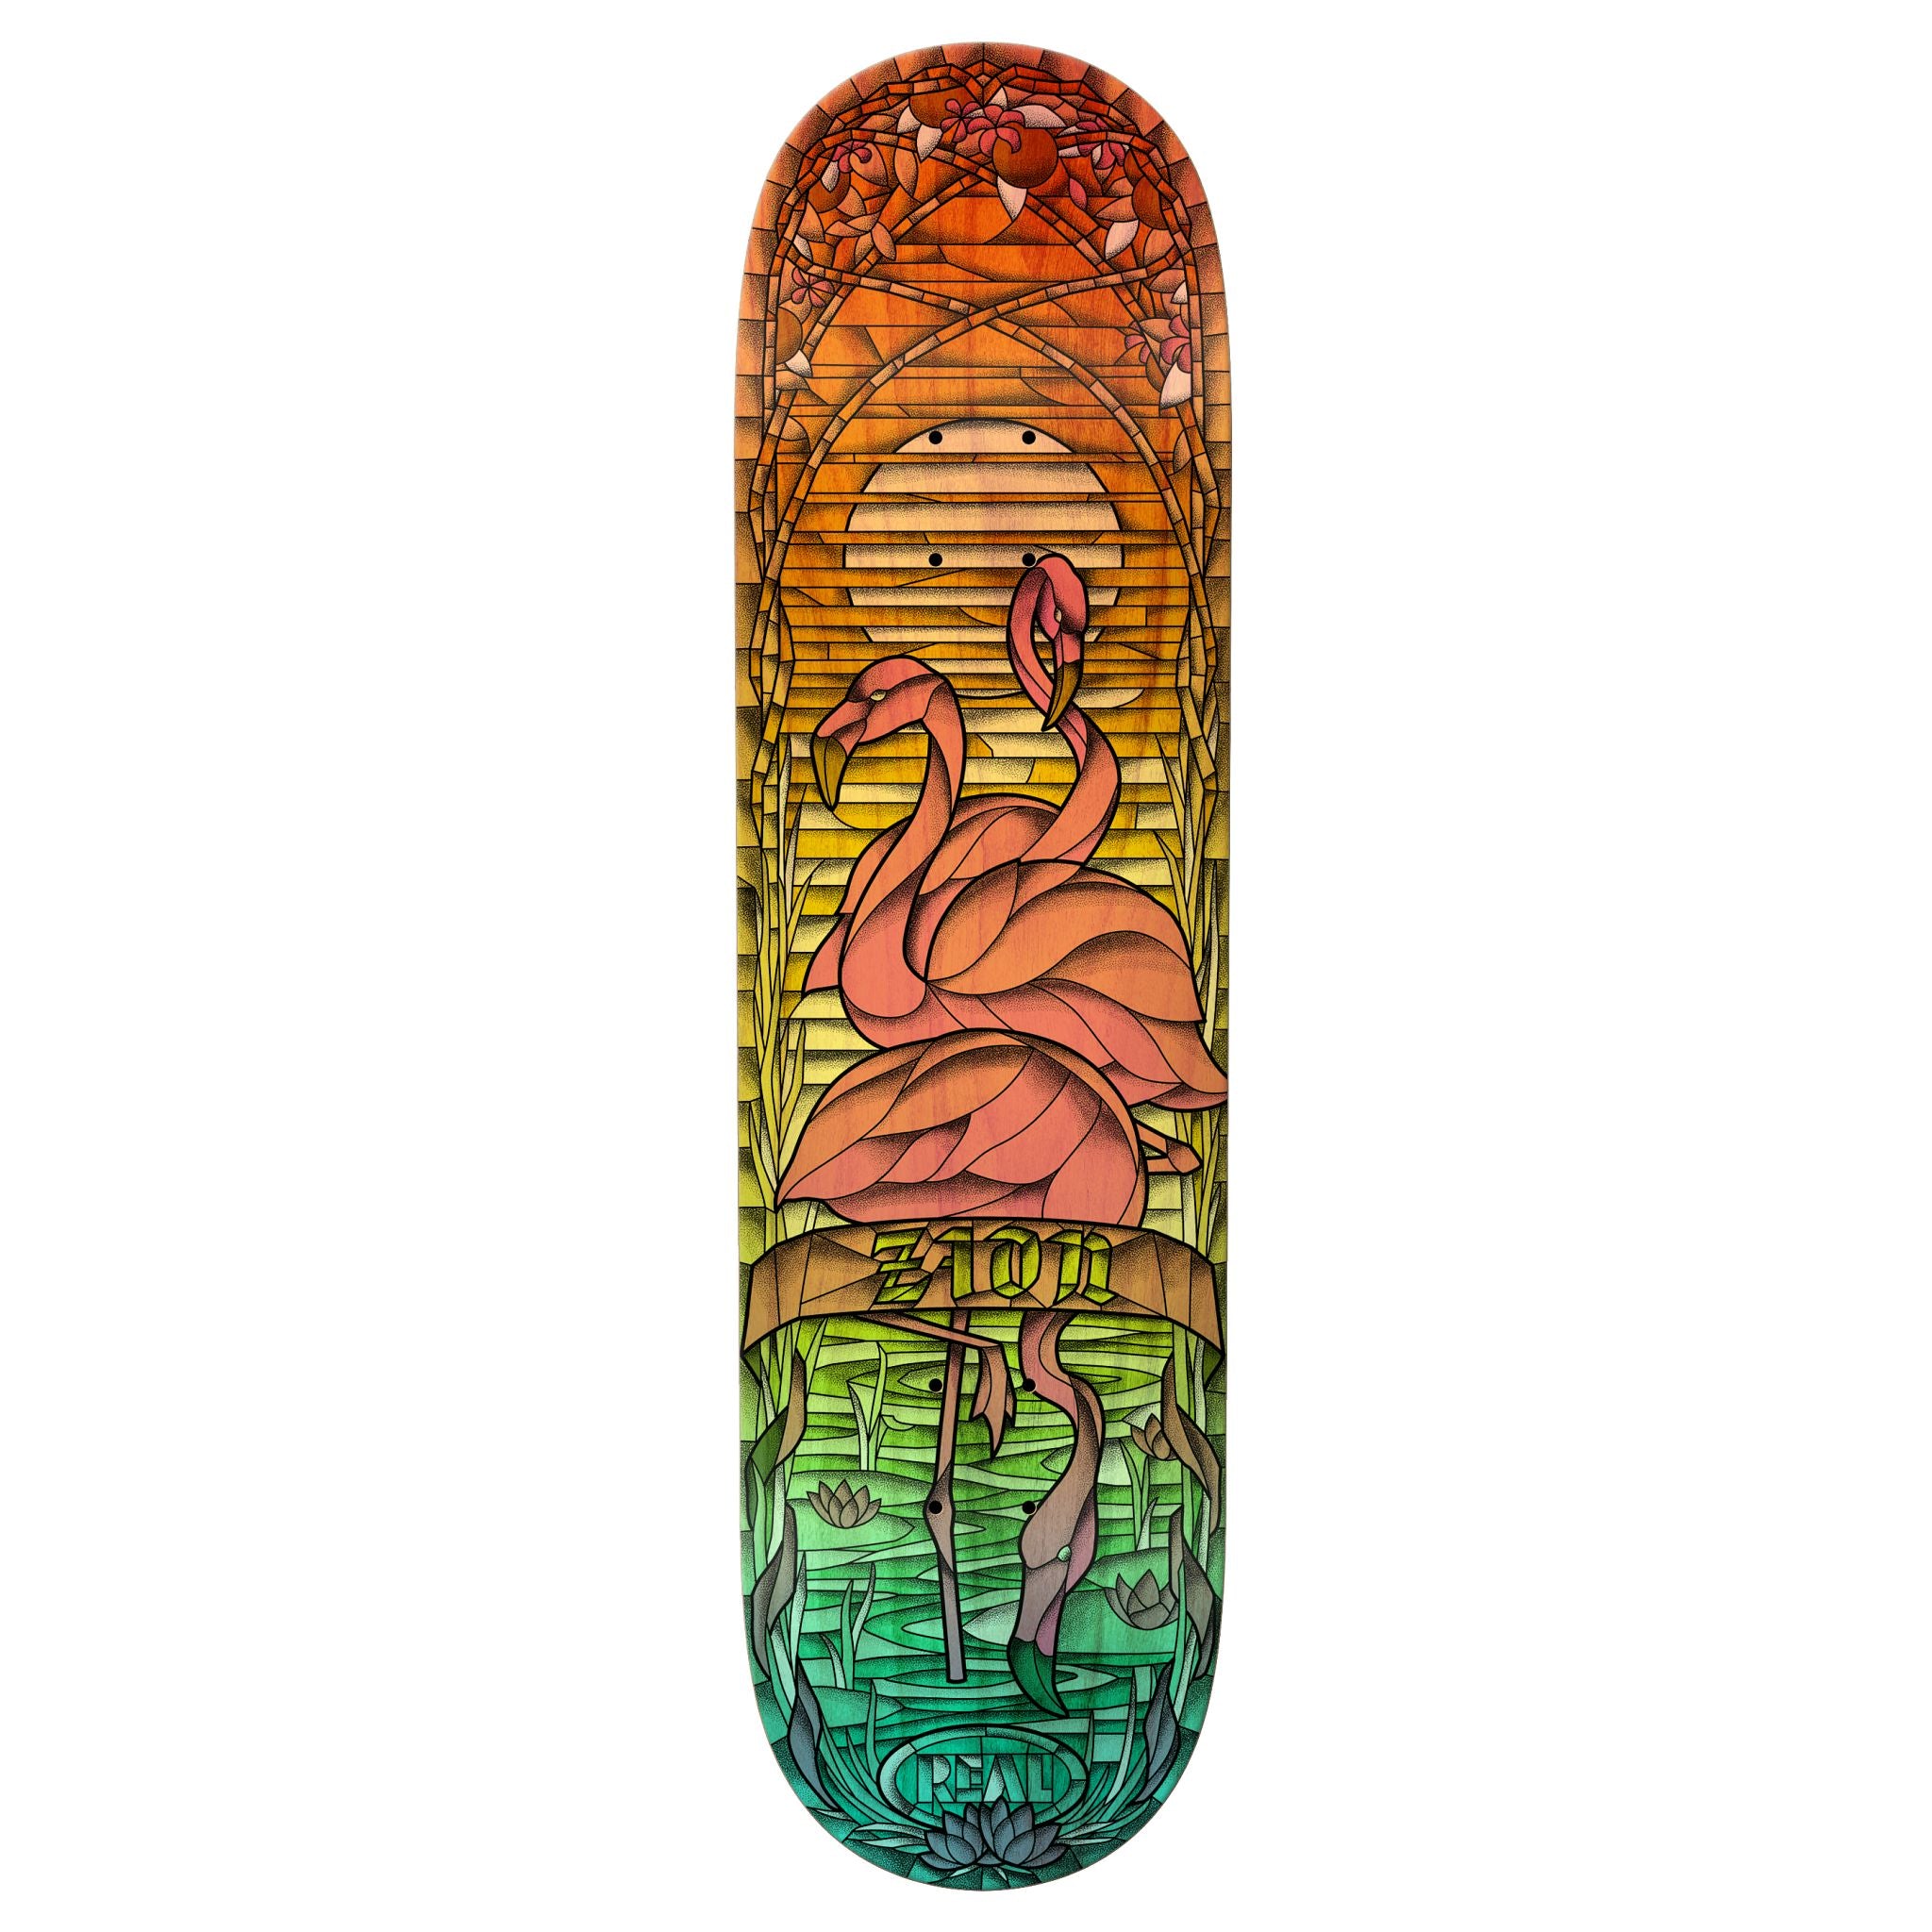 Real Skateboards "Zion Wright- Chromatic Cathedral" 8.38" Deck